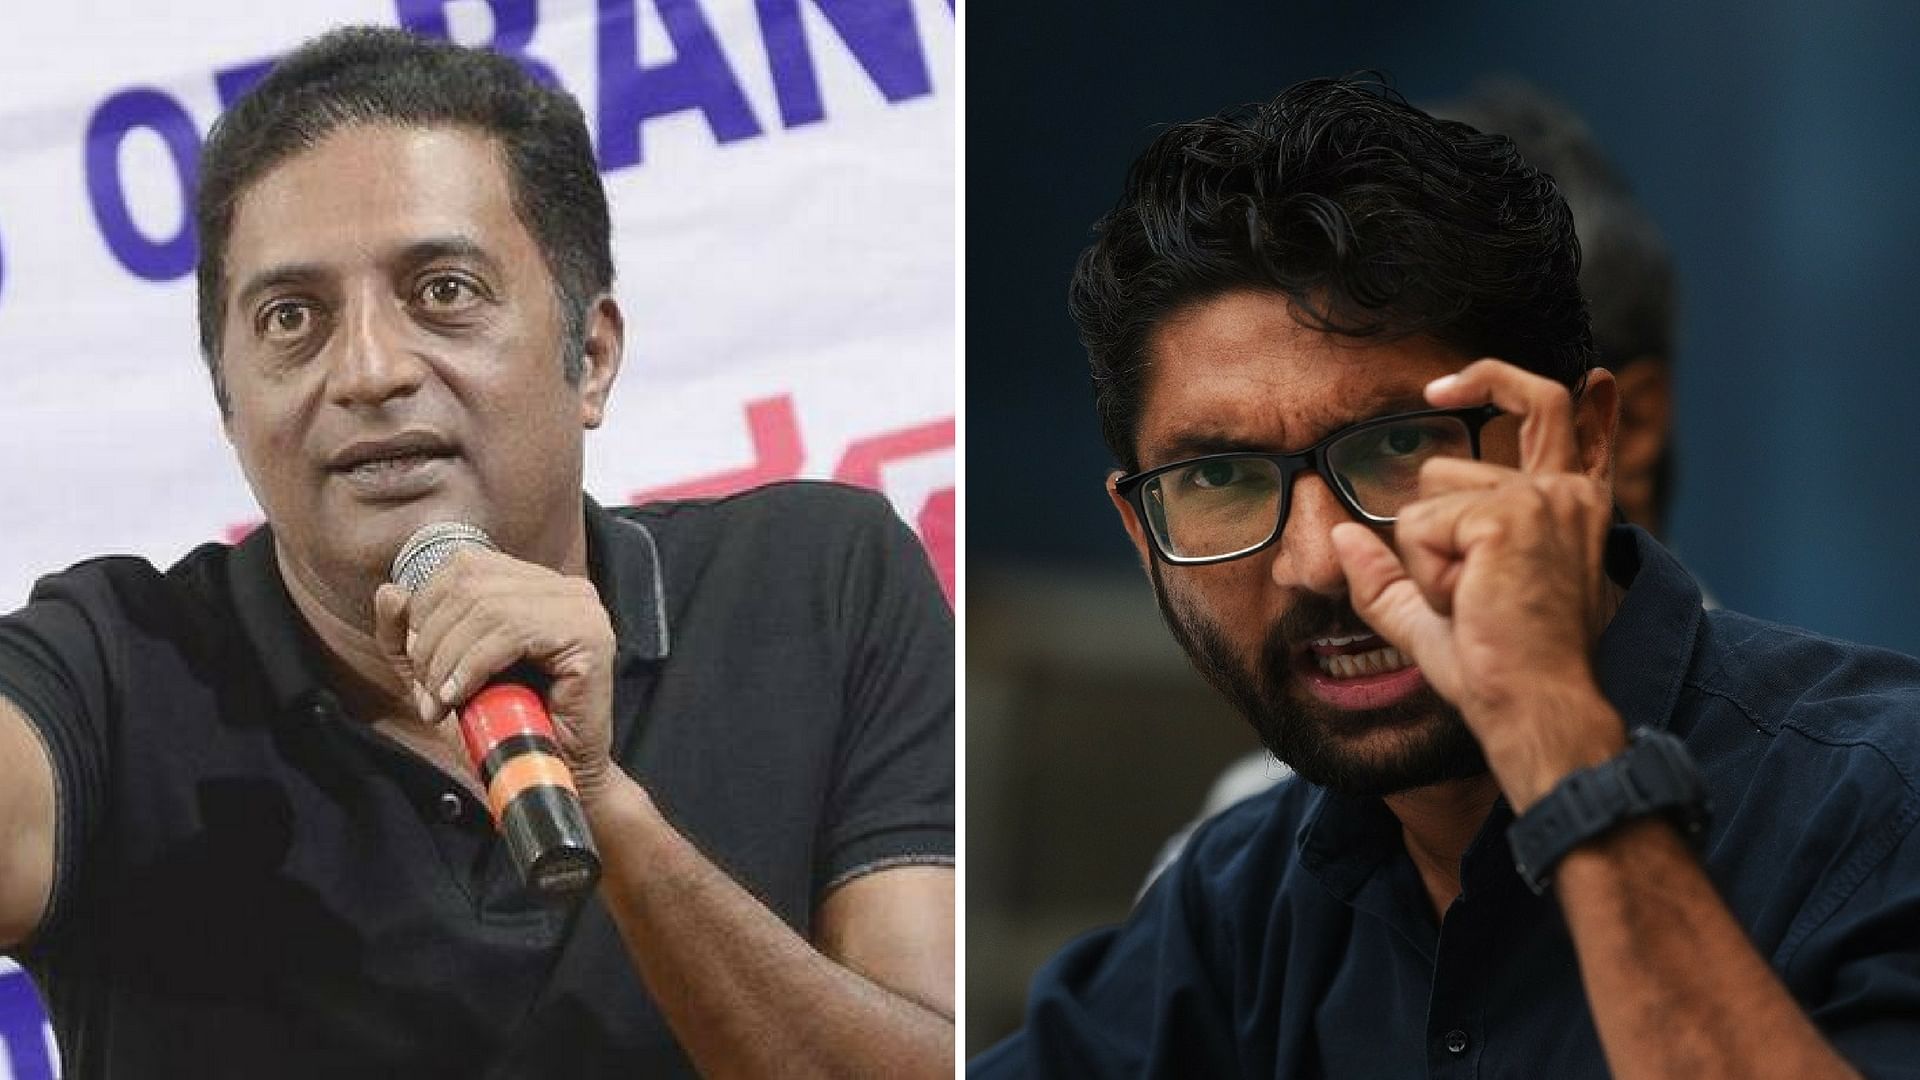 BJP has said that Jignesh Mevani called the prime minister “a corporate salesman and a thief who has looted the country”.